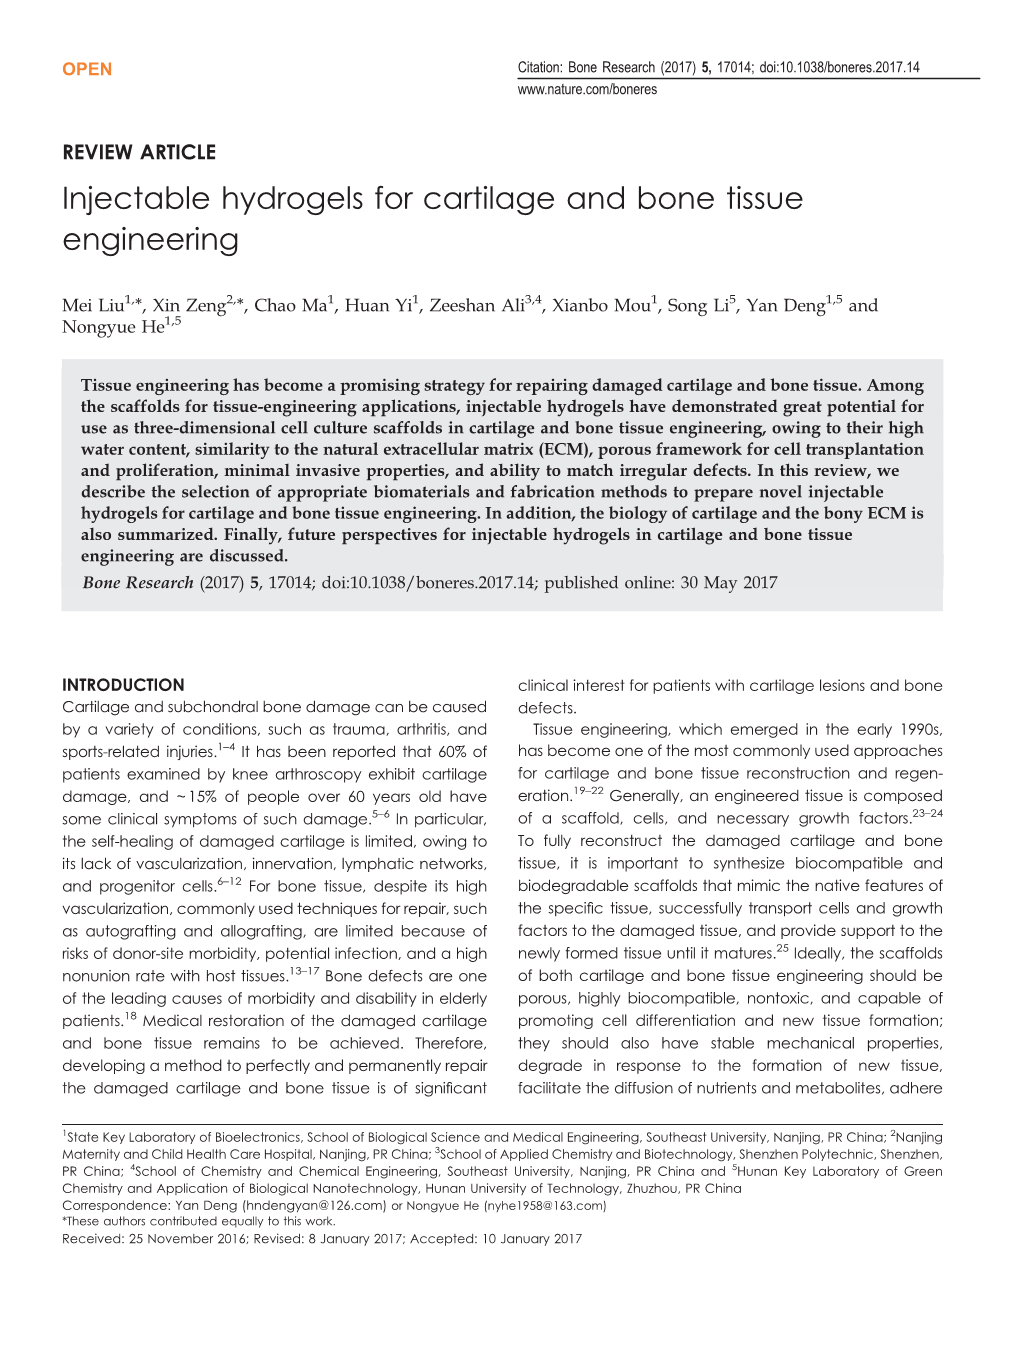 Injectable Hydrogels for Cartilage and Bone Tissue Engineering